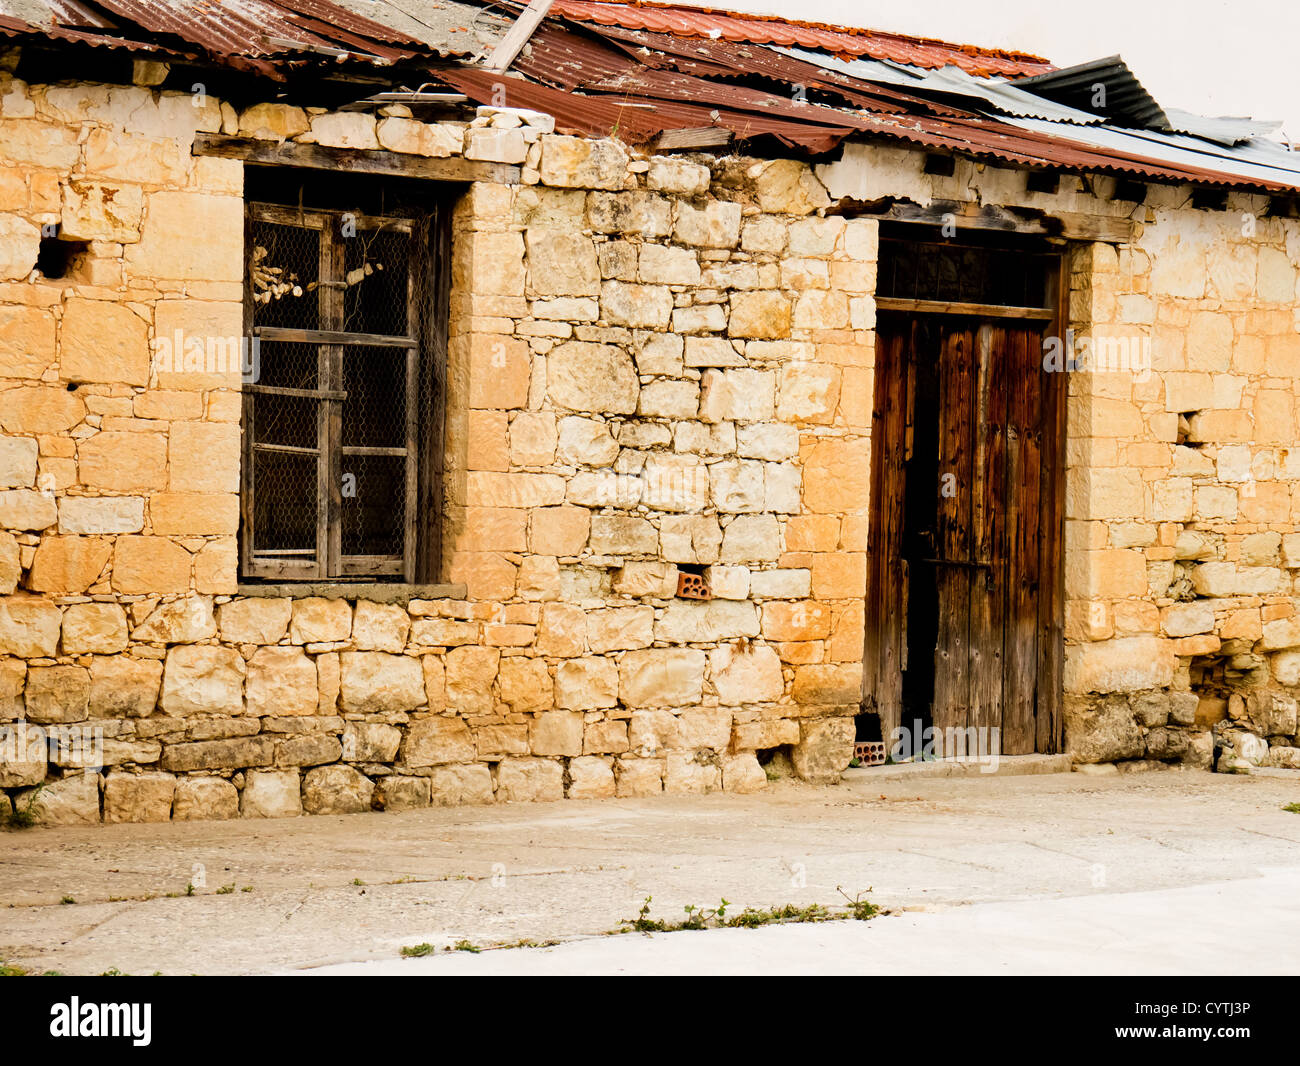 A derelict house in Omodos, Cyprus Stock Photo